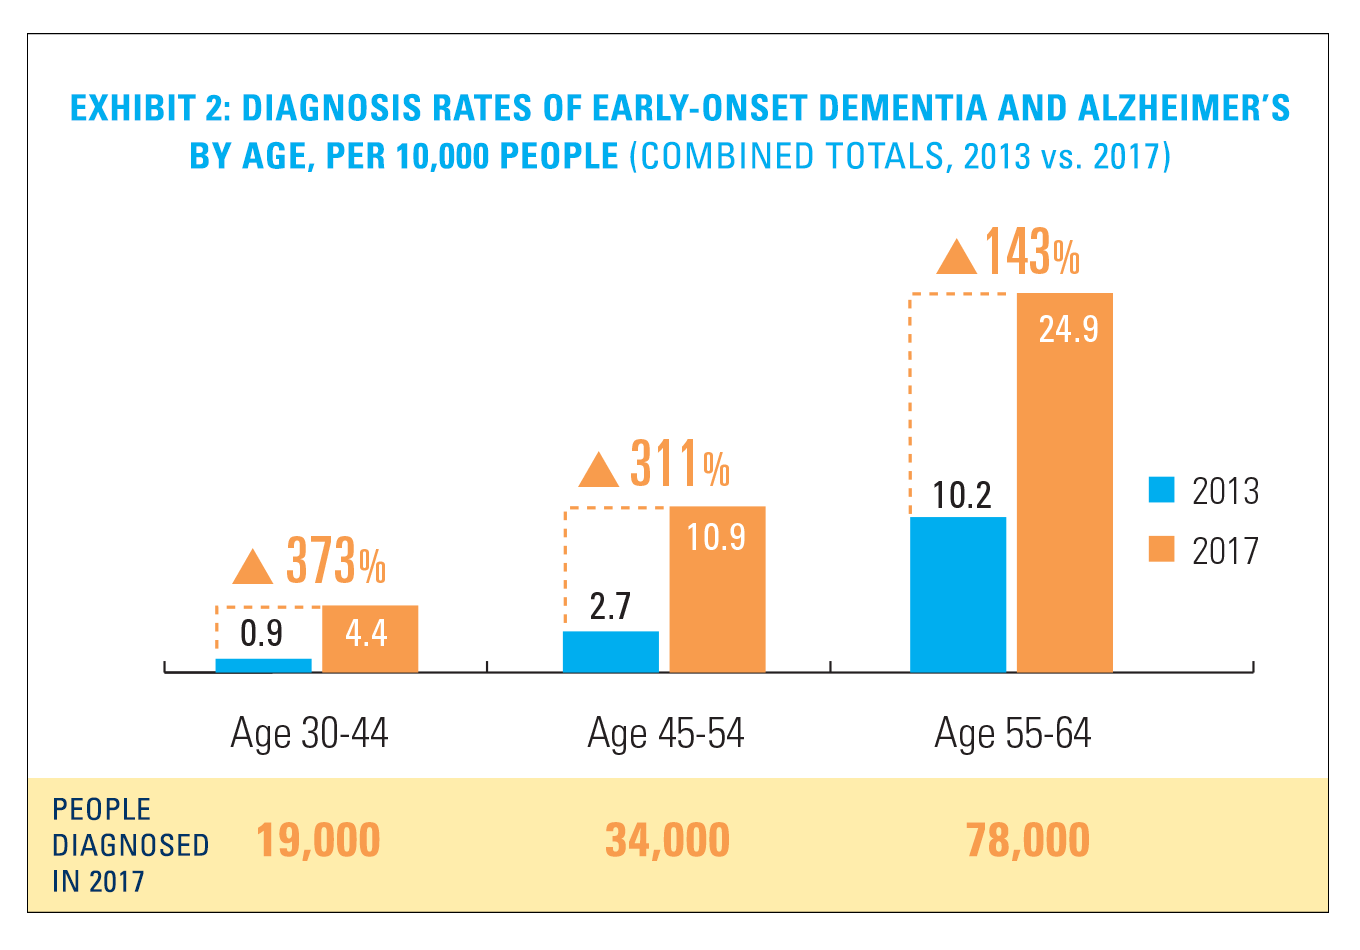 Diagnosis Rates of Early-Onset Dementia and Early-Onset Alzheimer’s by Age, per 10,000 People. A bar chart shows the combined totals for the rate of increase from 2013 to 2017 across three age groups. Age 30 to 44 increased 373% to a total of 19,000. Age 45 to 54 increased 311% to a total of 34,000. Age 55 to 64 increased 143% to a total of 78,000.